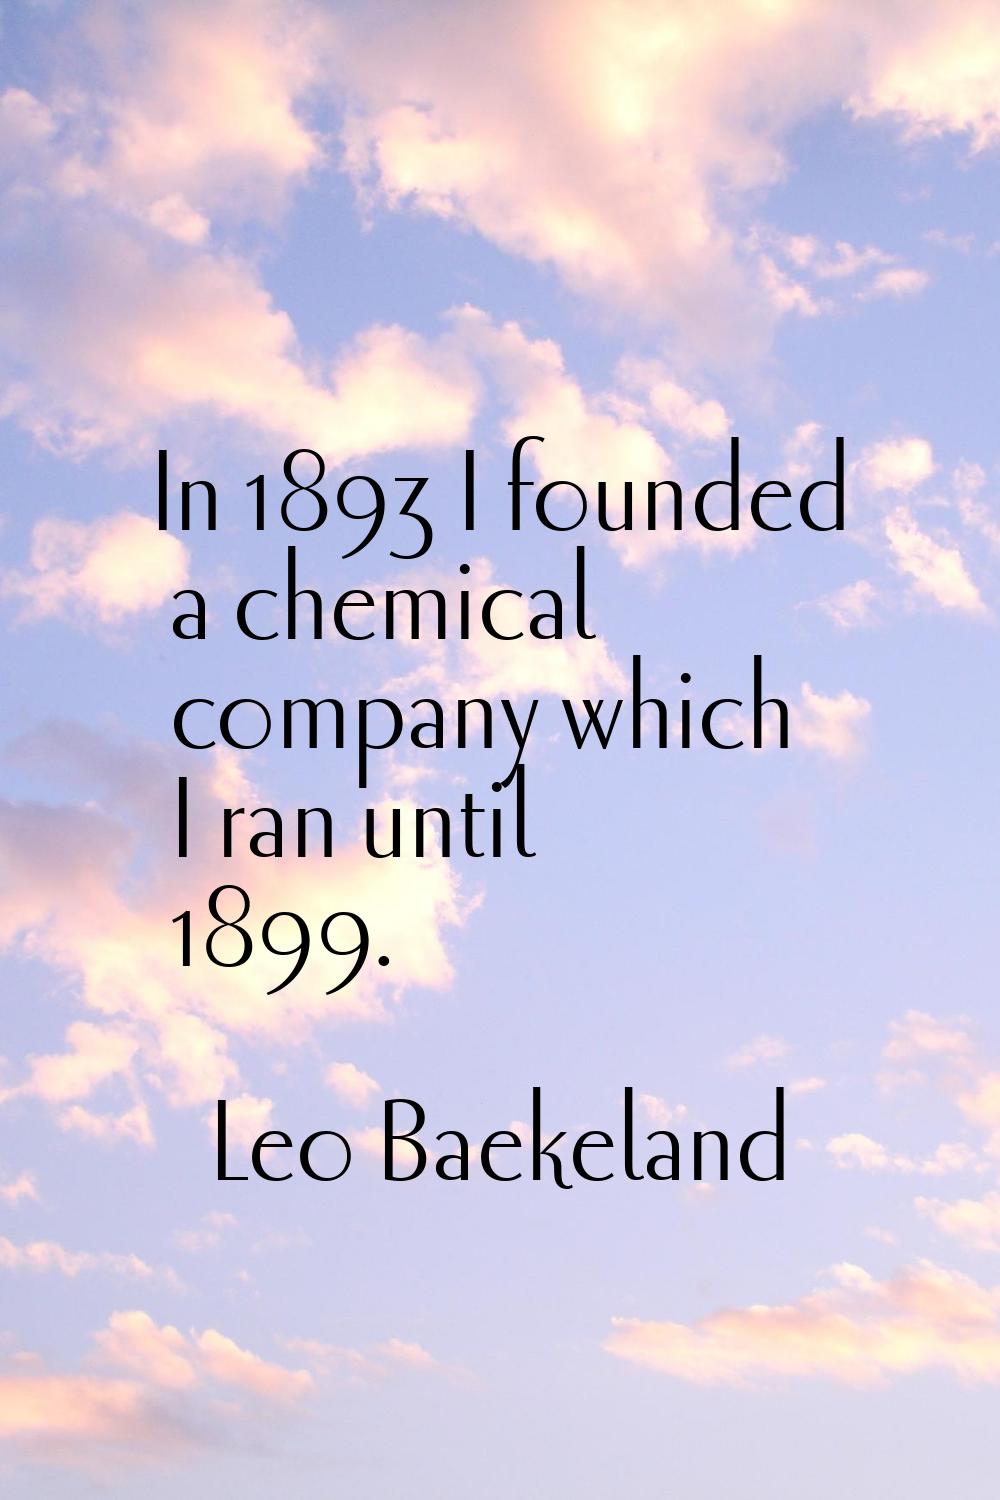 In 1893 I founded a chemical company which I ran until 1899.